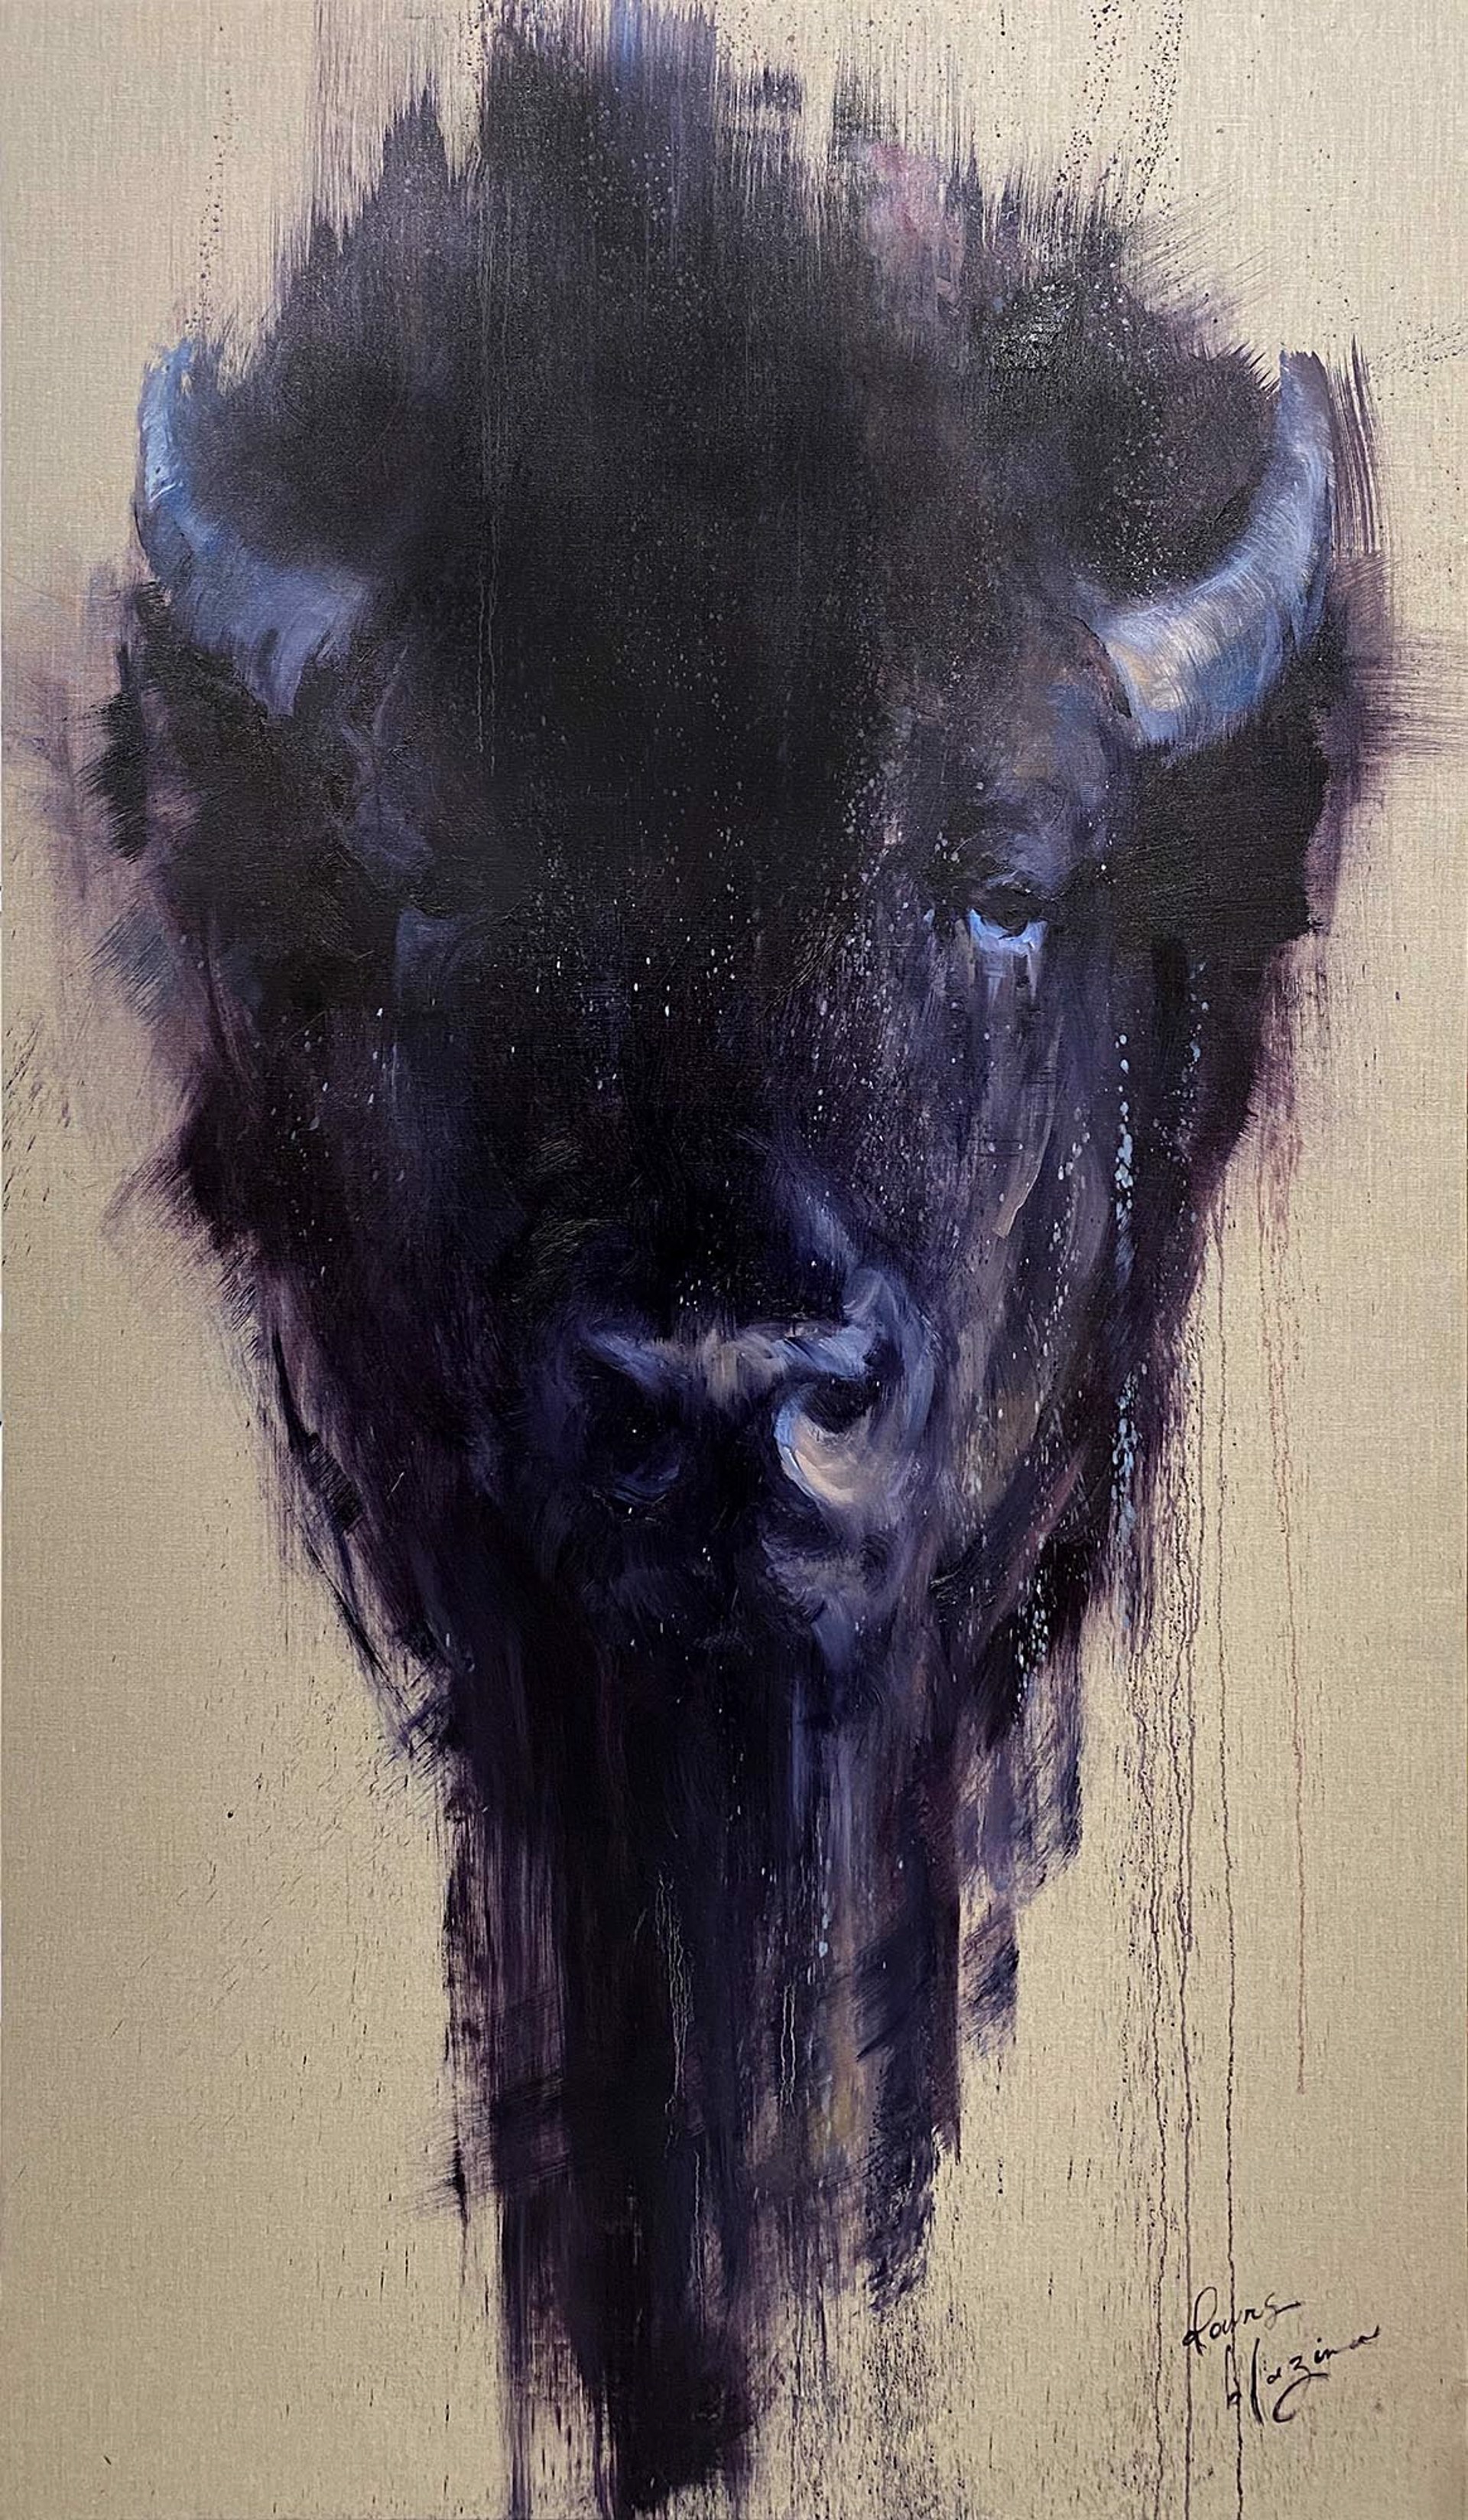 Original Oil on Linen Painting Of A Buffalo Head In Dramatic Contemporary Style  With Dark Subtle Colors, By Amber Blazina